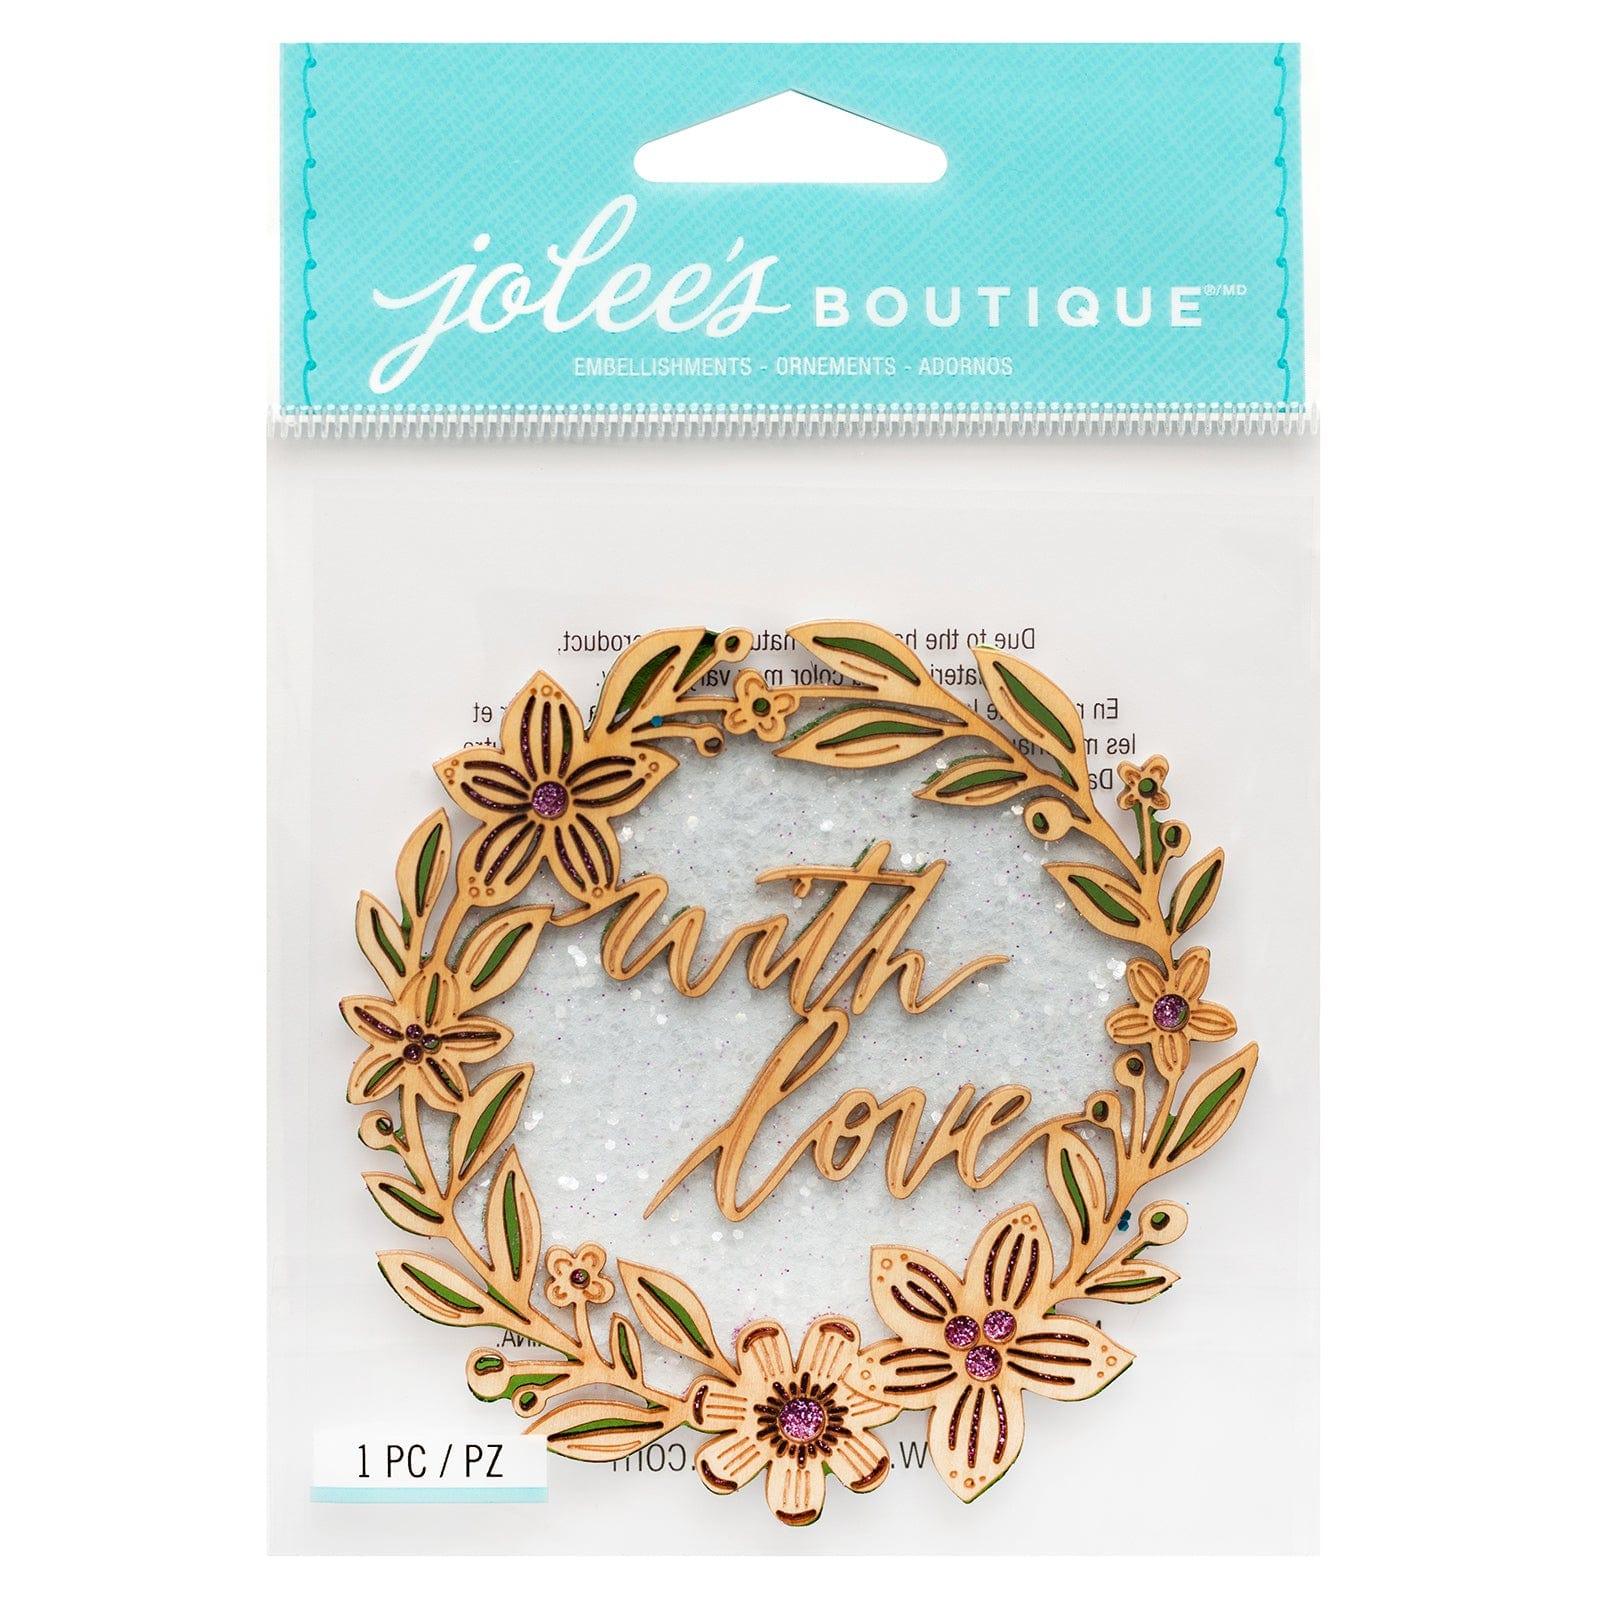 Wood Collection Floral Word Wreath 4 x 4.5 Scrapbook Embellishment by Jolee's Boutique - Scrapbook Supply Companies